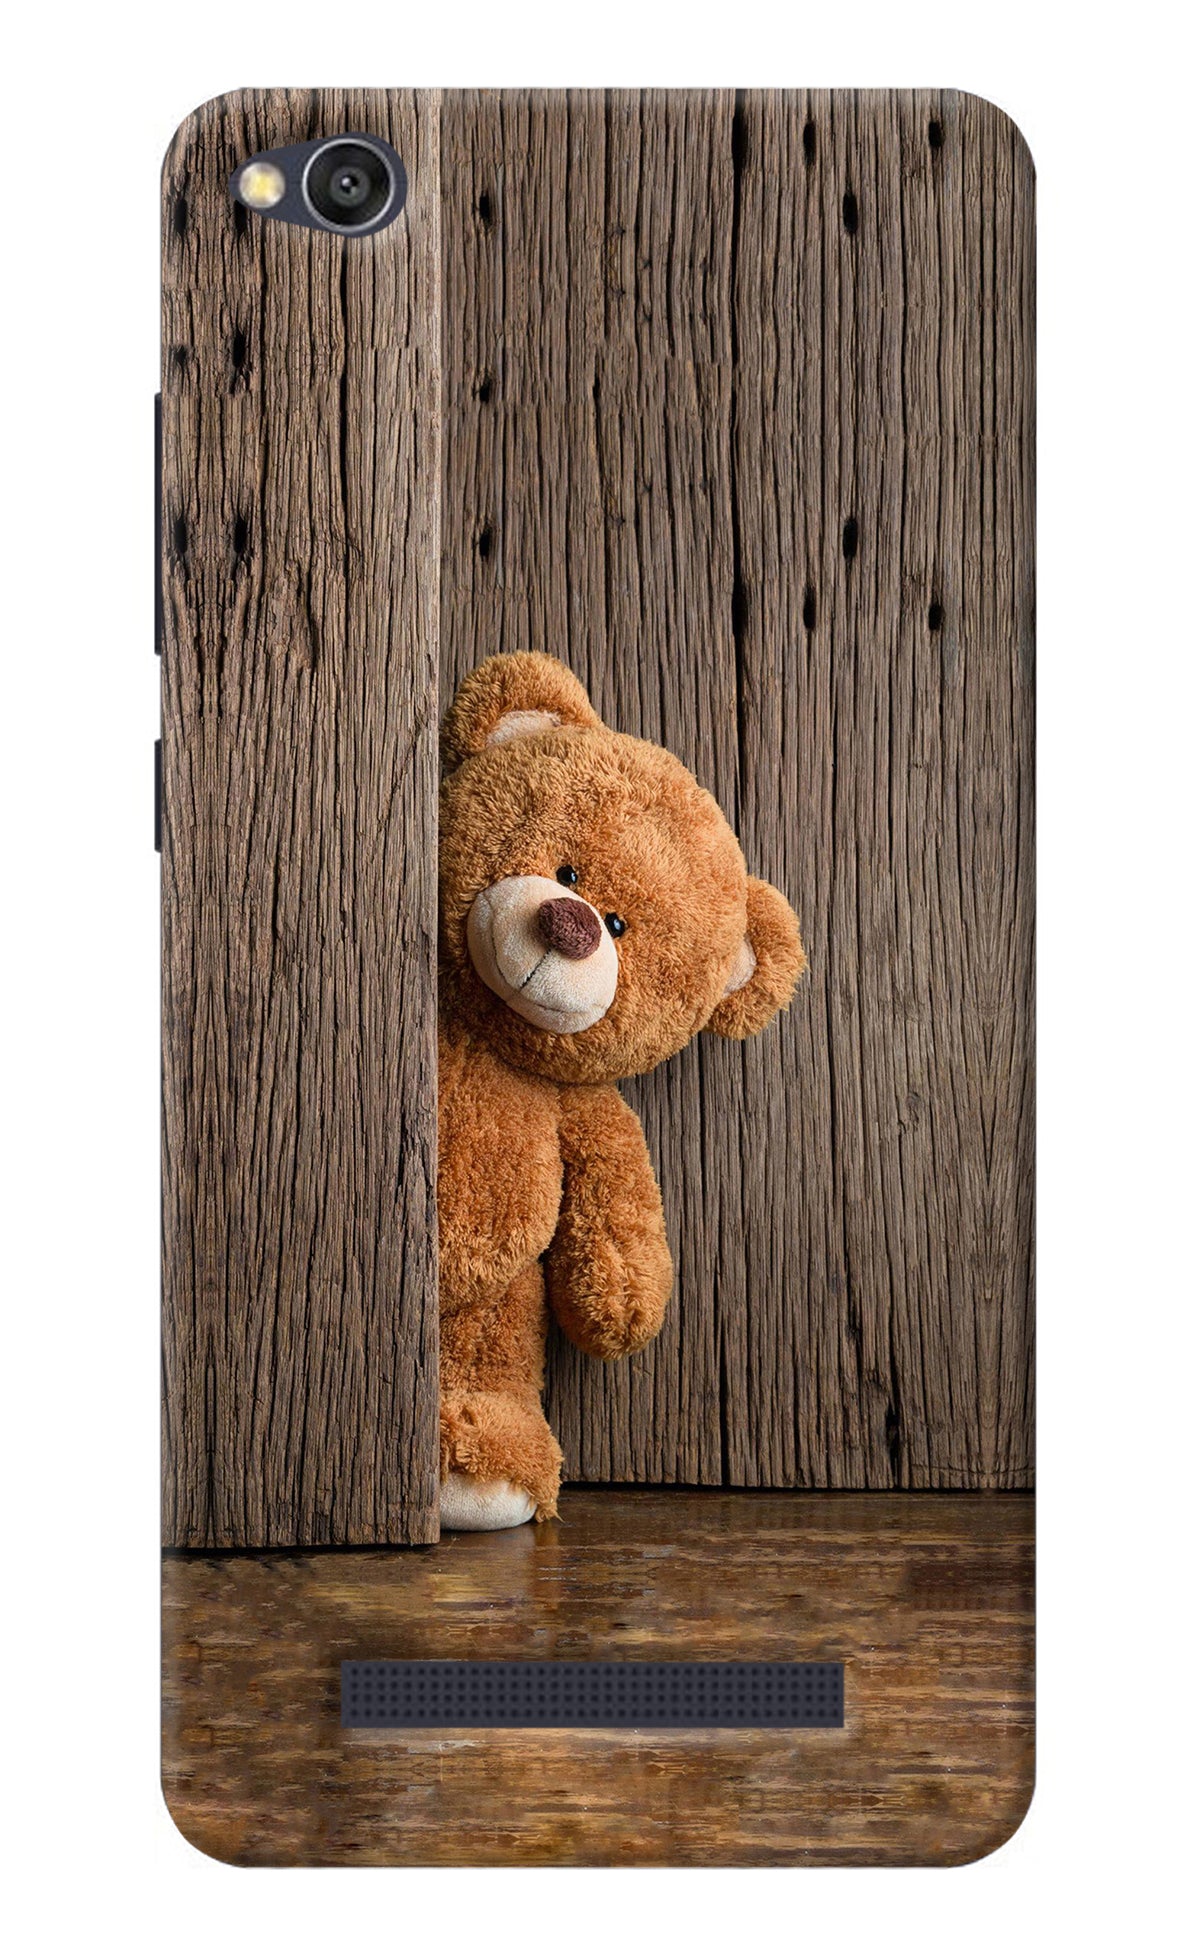 Teddy Wooden Redmi 4A Back Cover